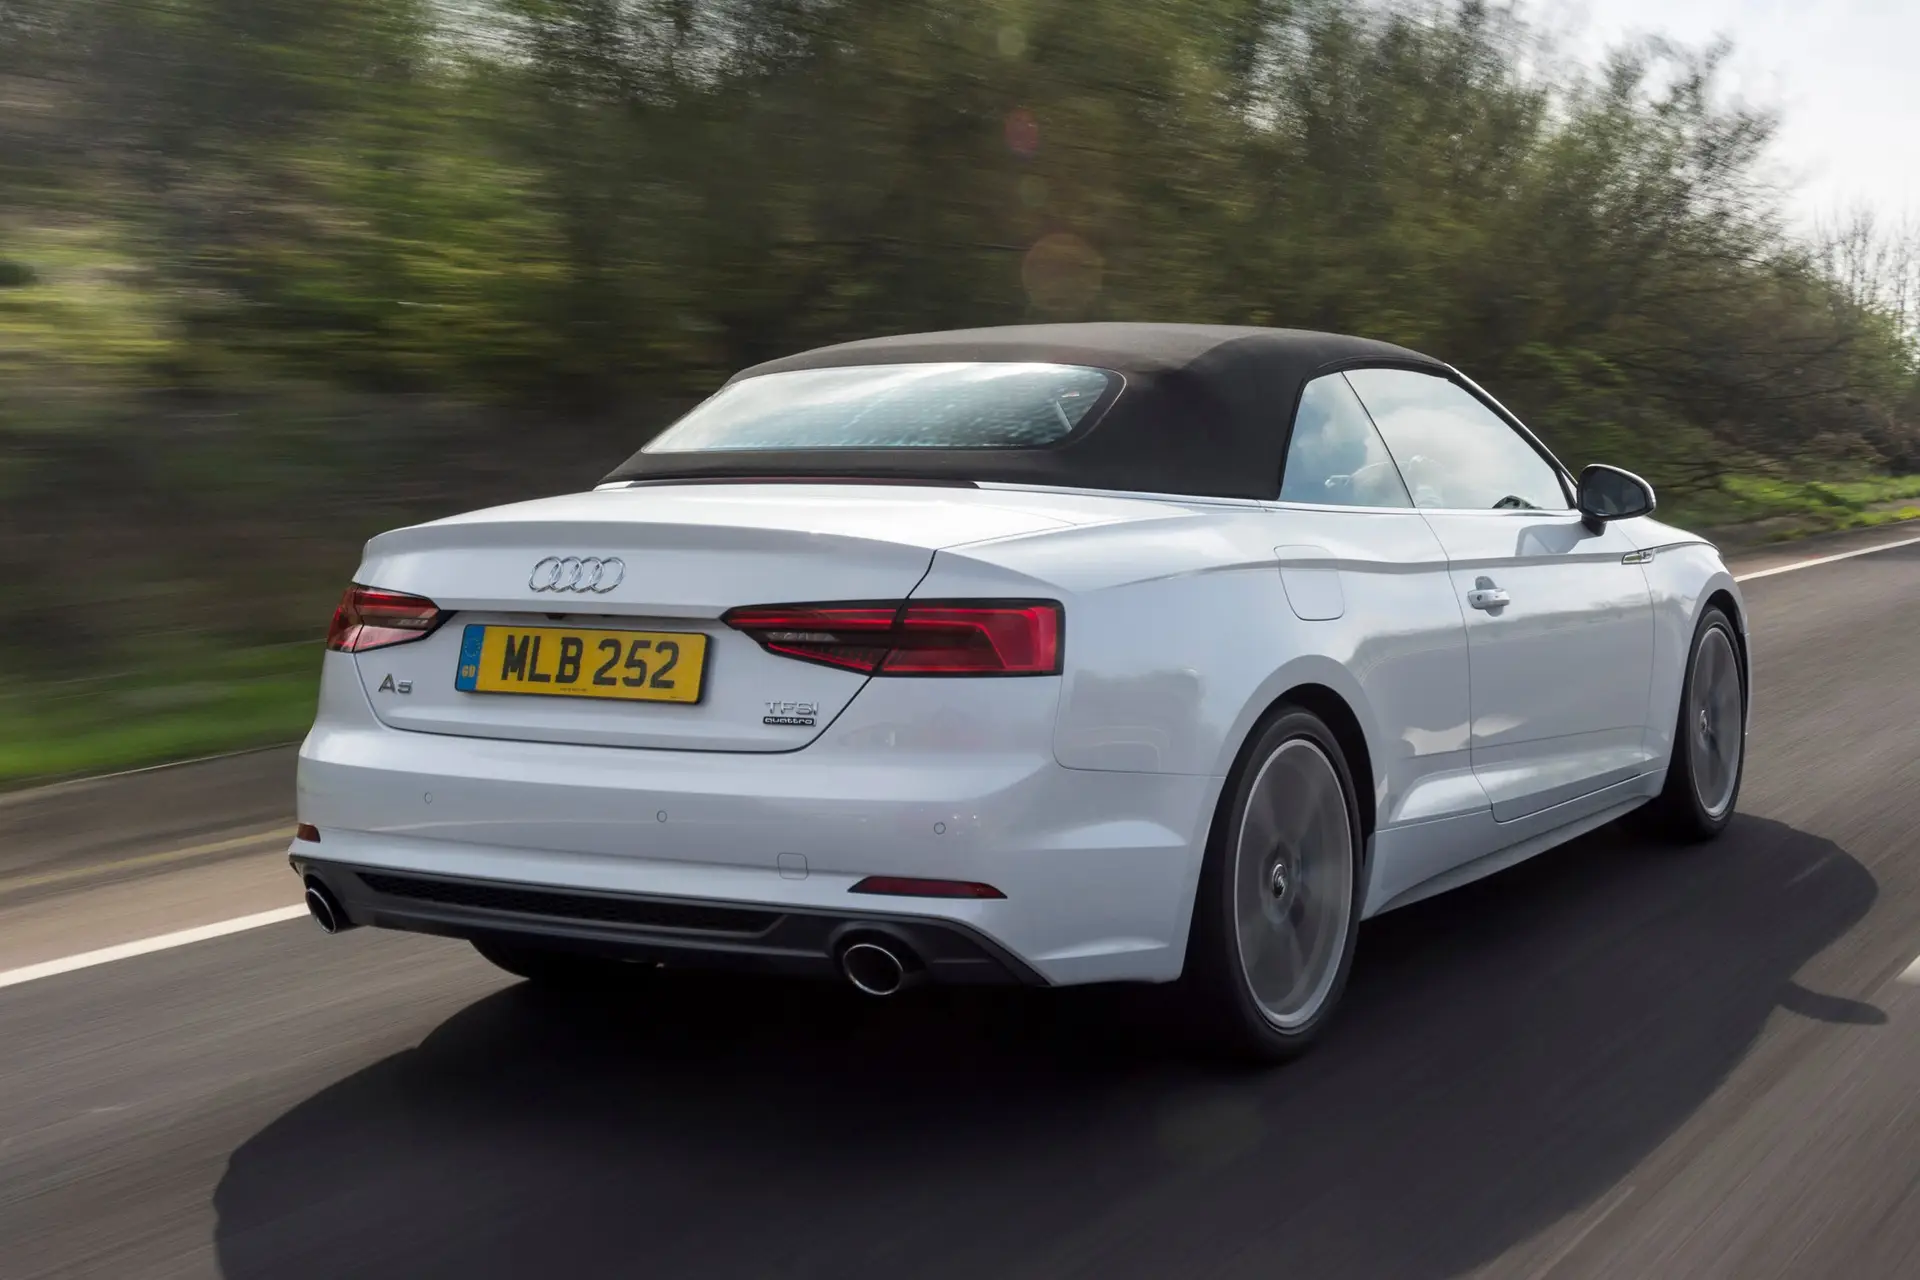 Audi A5 Cabriolet Review 2023: exterior rear three quarter photo of the Audi A5 Cabriolet on the road 